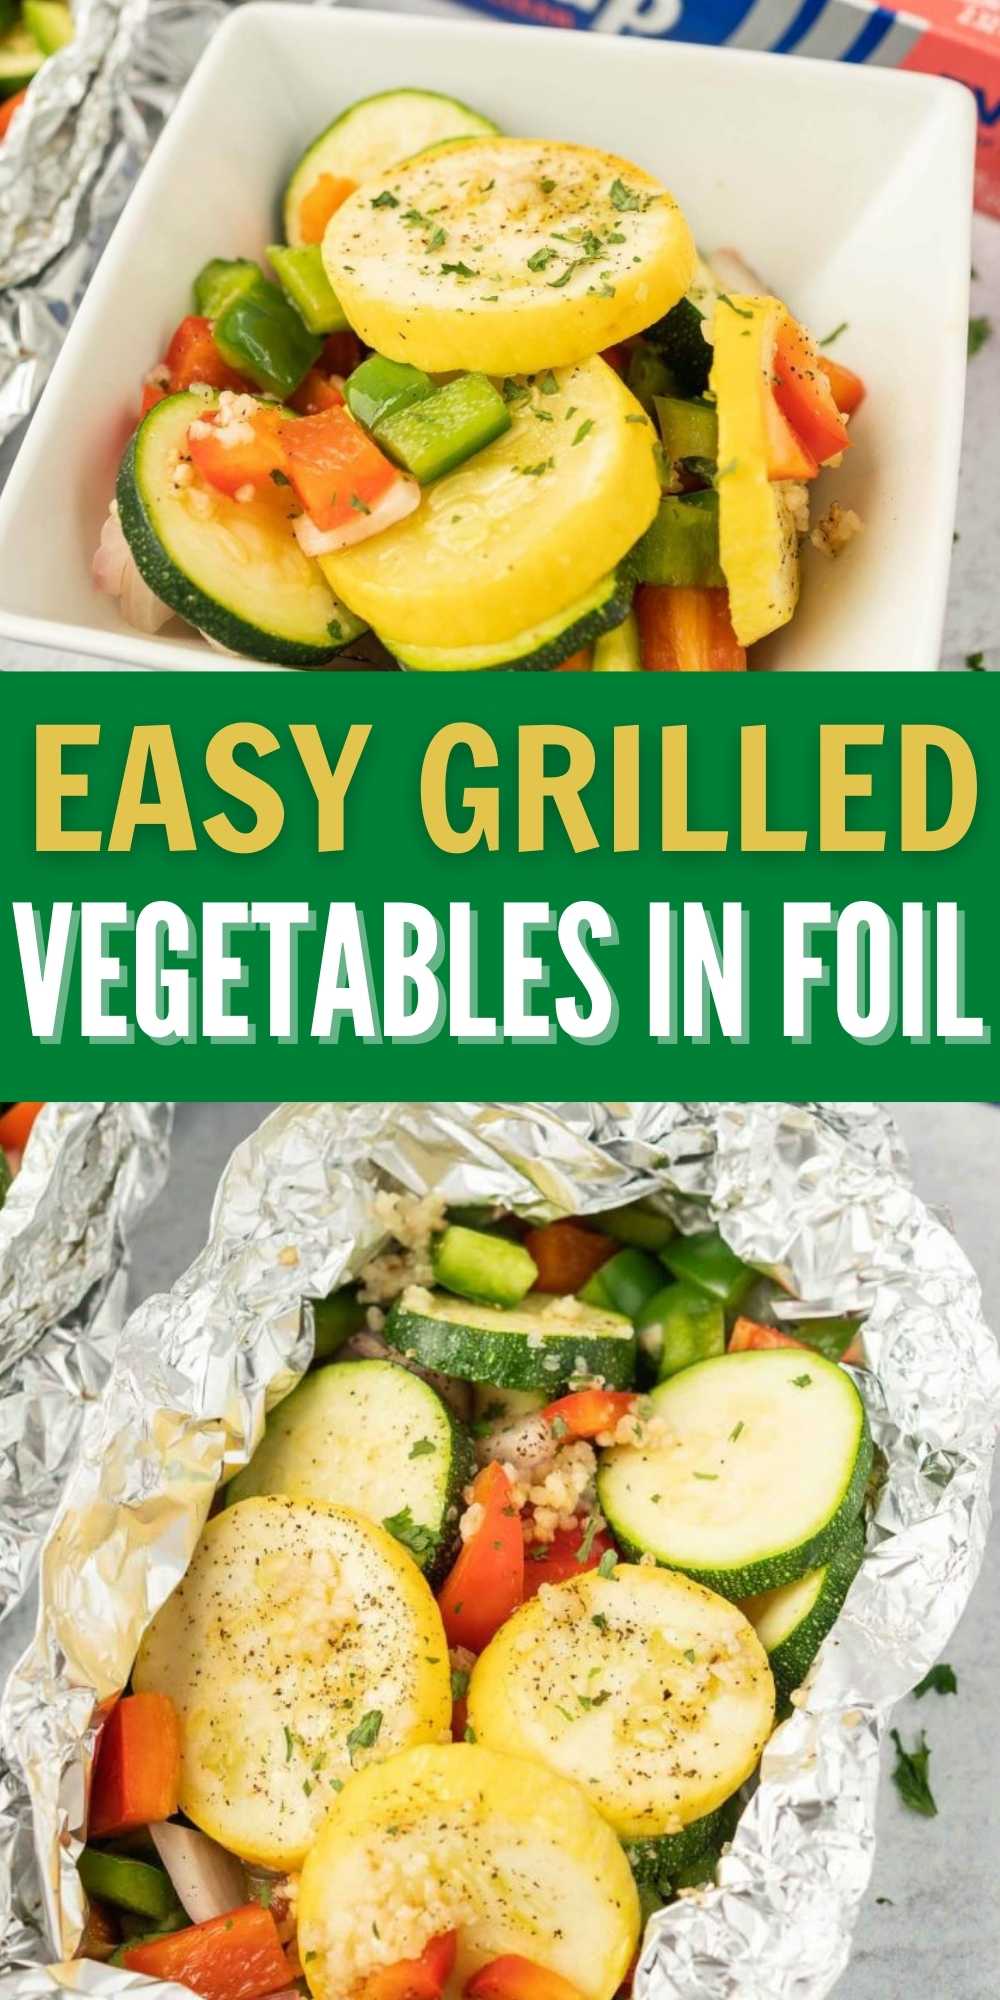 Try making Grilled Vegetables Foil Pack for an easy and delicious side dish idea They are healthy, frugal and so simple to prepare. You’ll love this super easy and healthy grilled side dish recipe. #eatingonadime #grillingrecipes #sidedishes #sidedishrecipes 